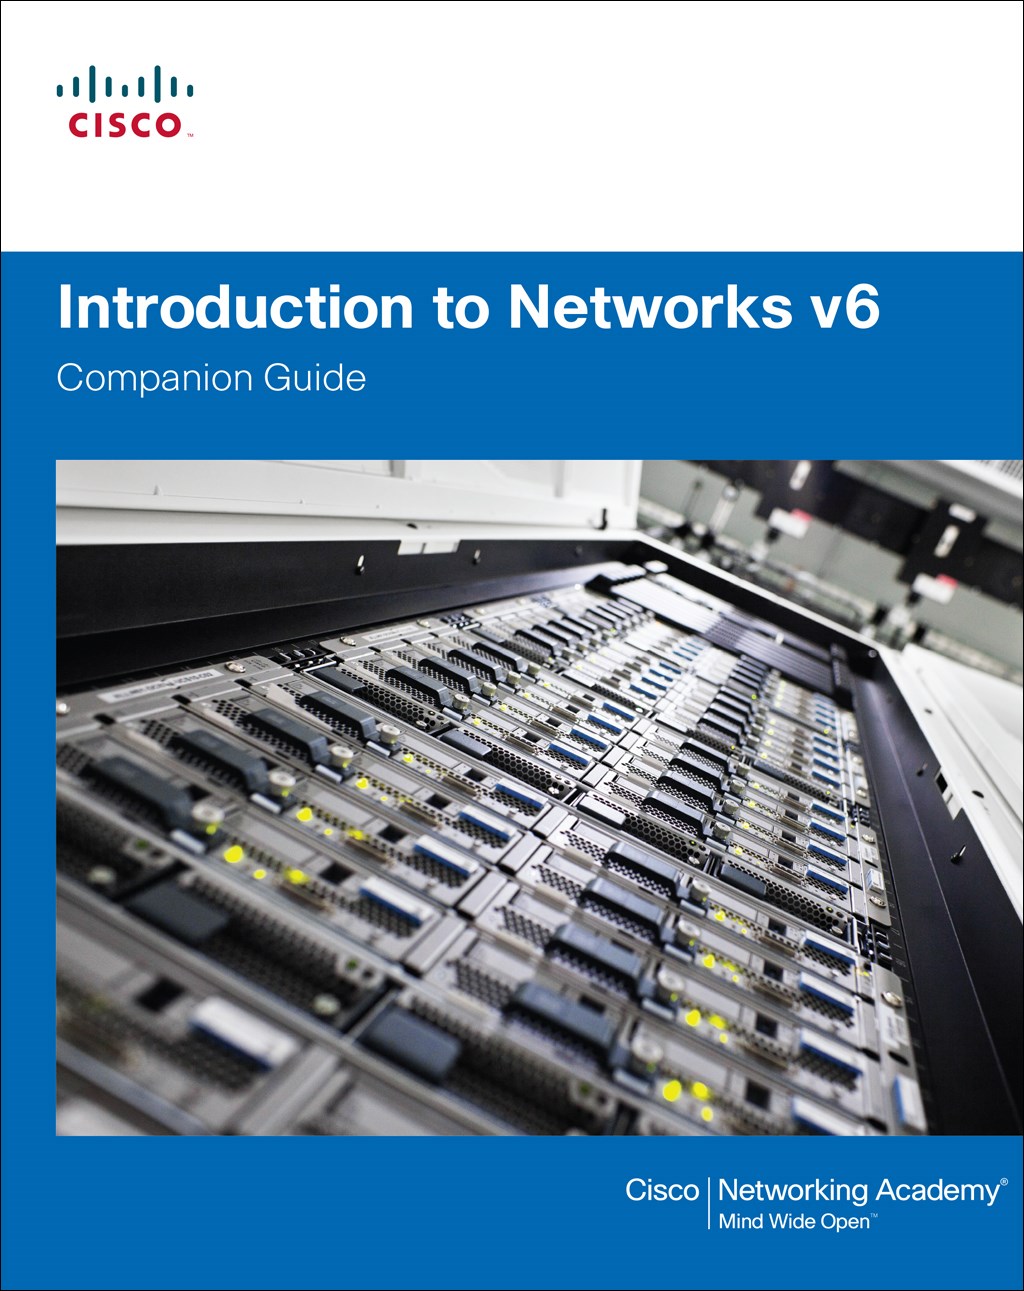 introduction to networks v6 companion guide pdf free download